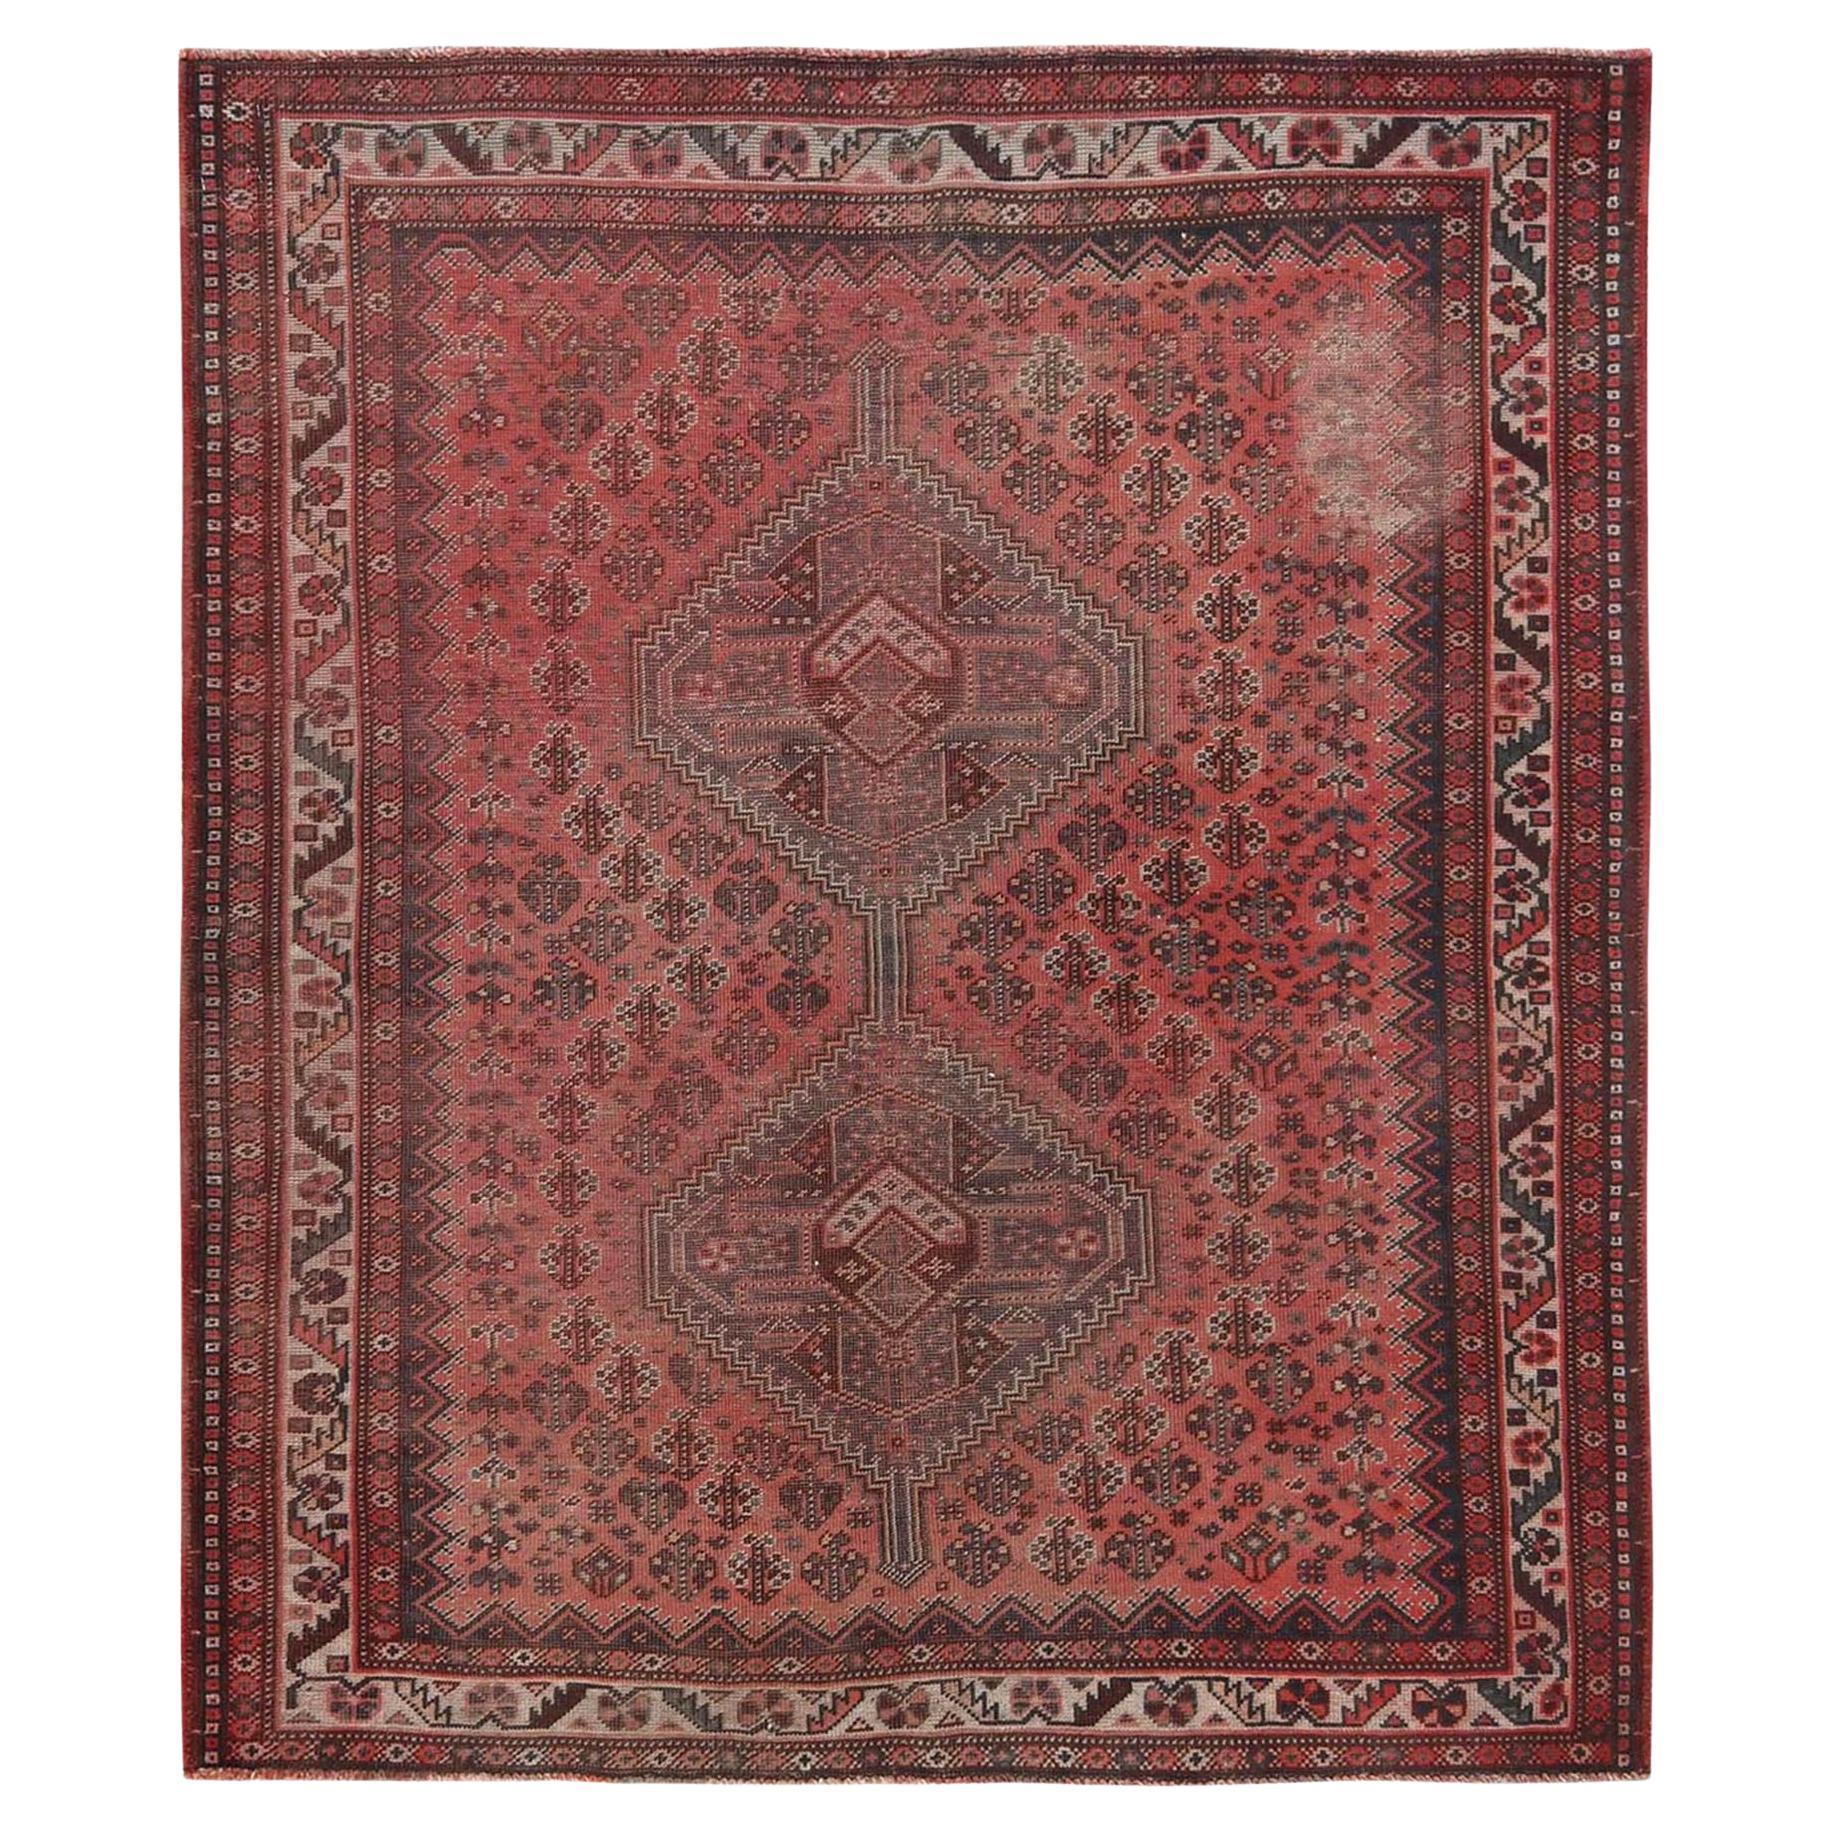 Tomato Red, Distressed Look Vintage Persian Shiraz, Hand Knotted Worn Wool Rug For Sale